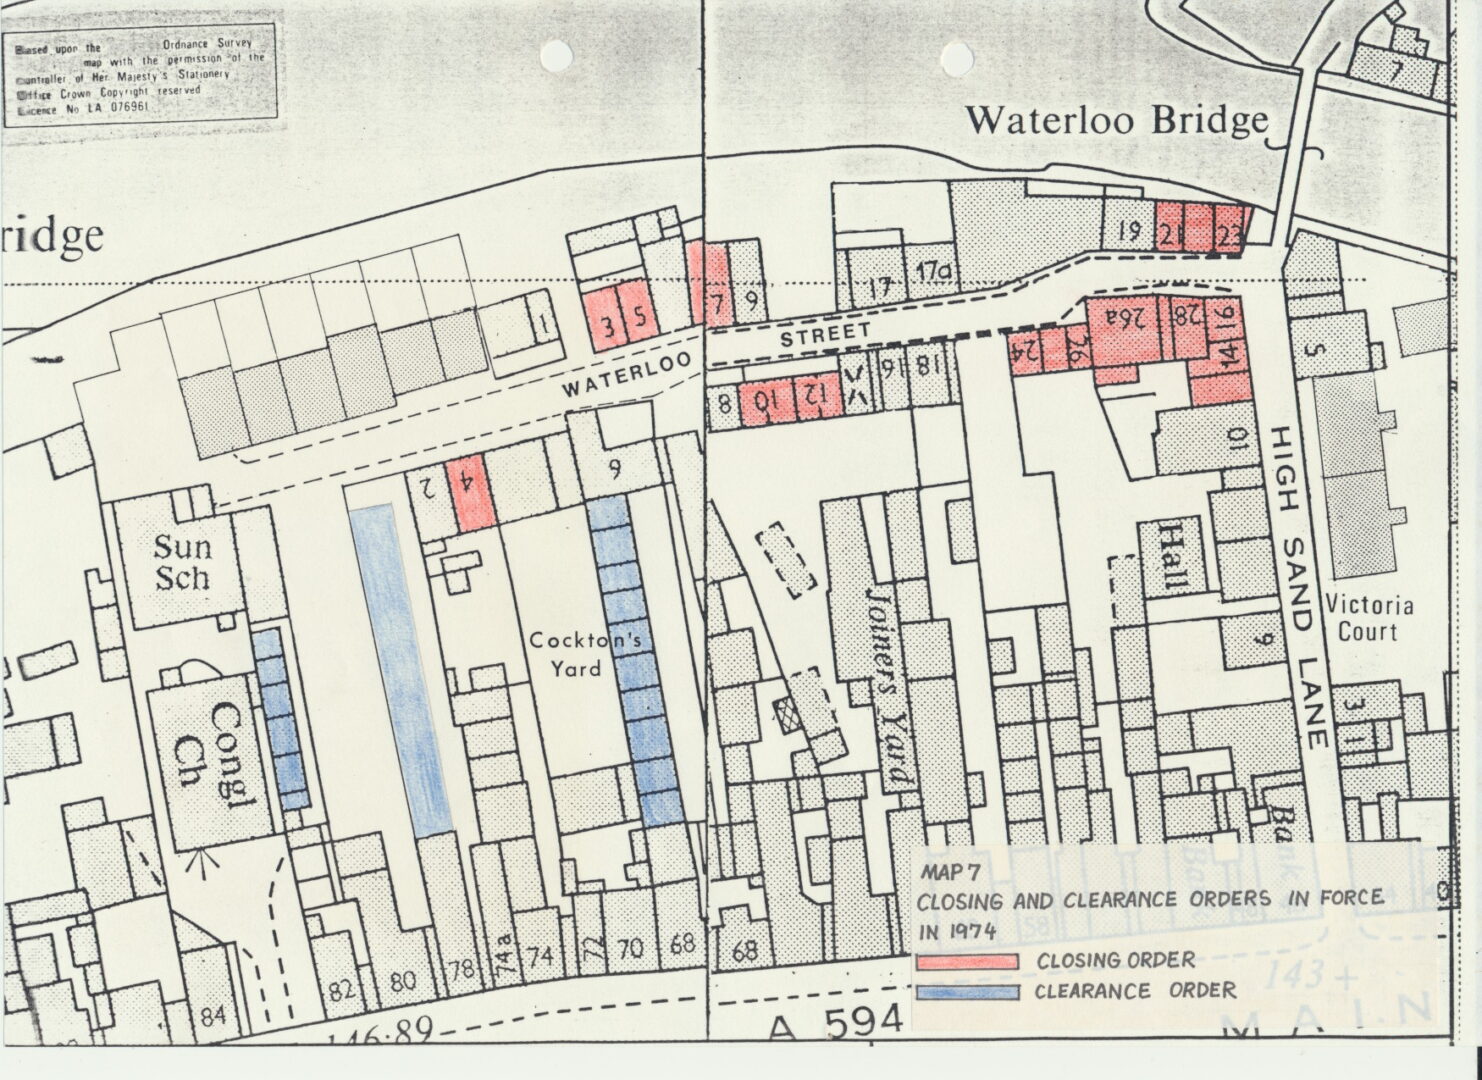 Map 07 Waterloo Street closing and clearance orders in force in 1974 in report of 1989 rotated